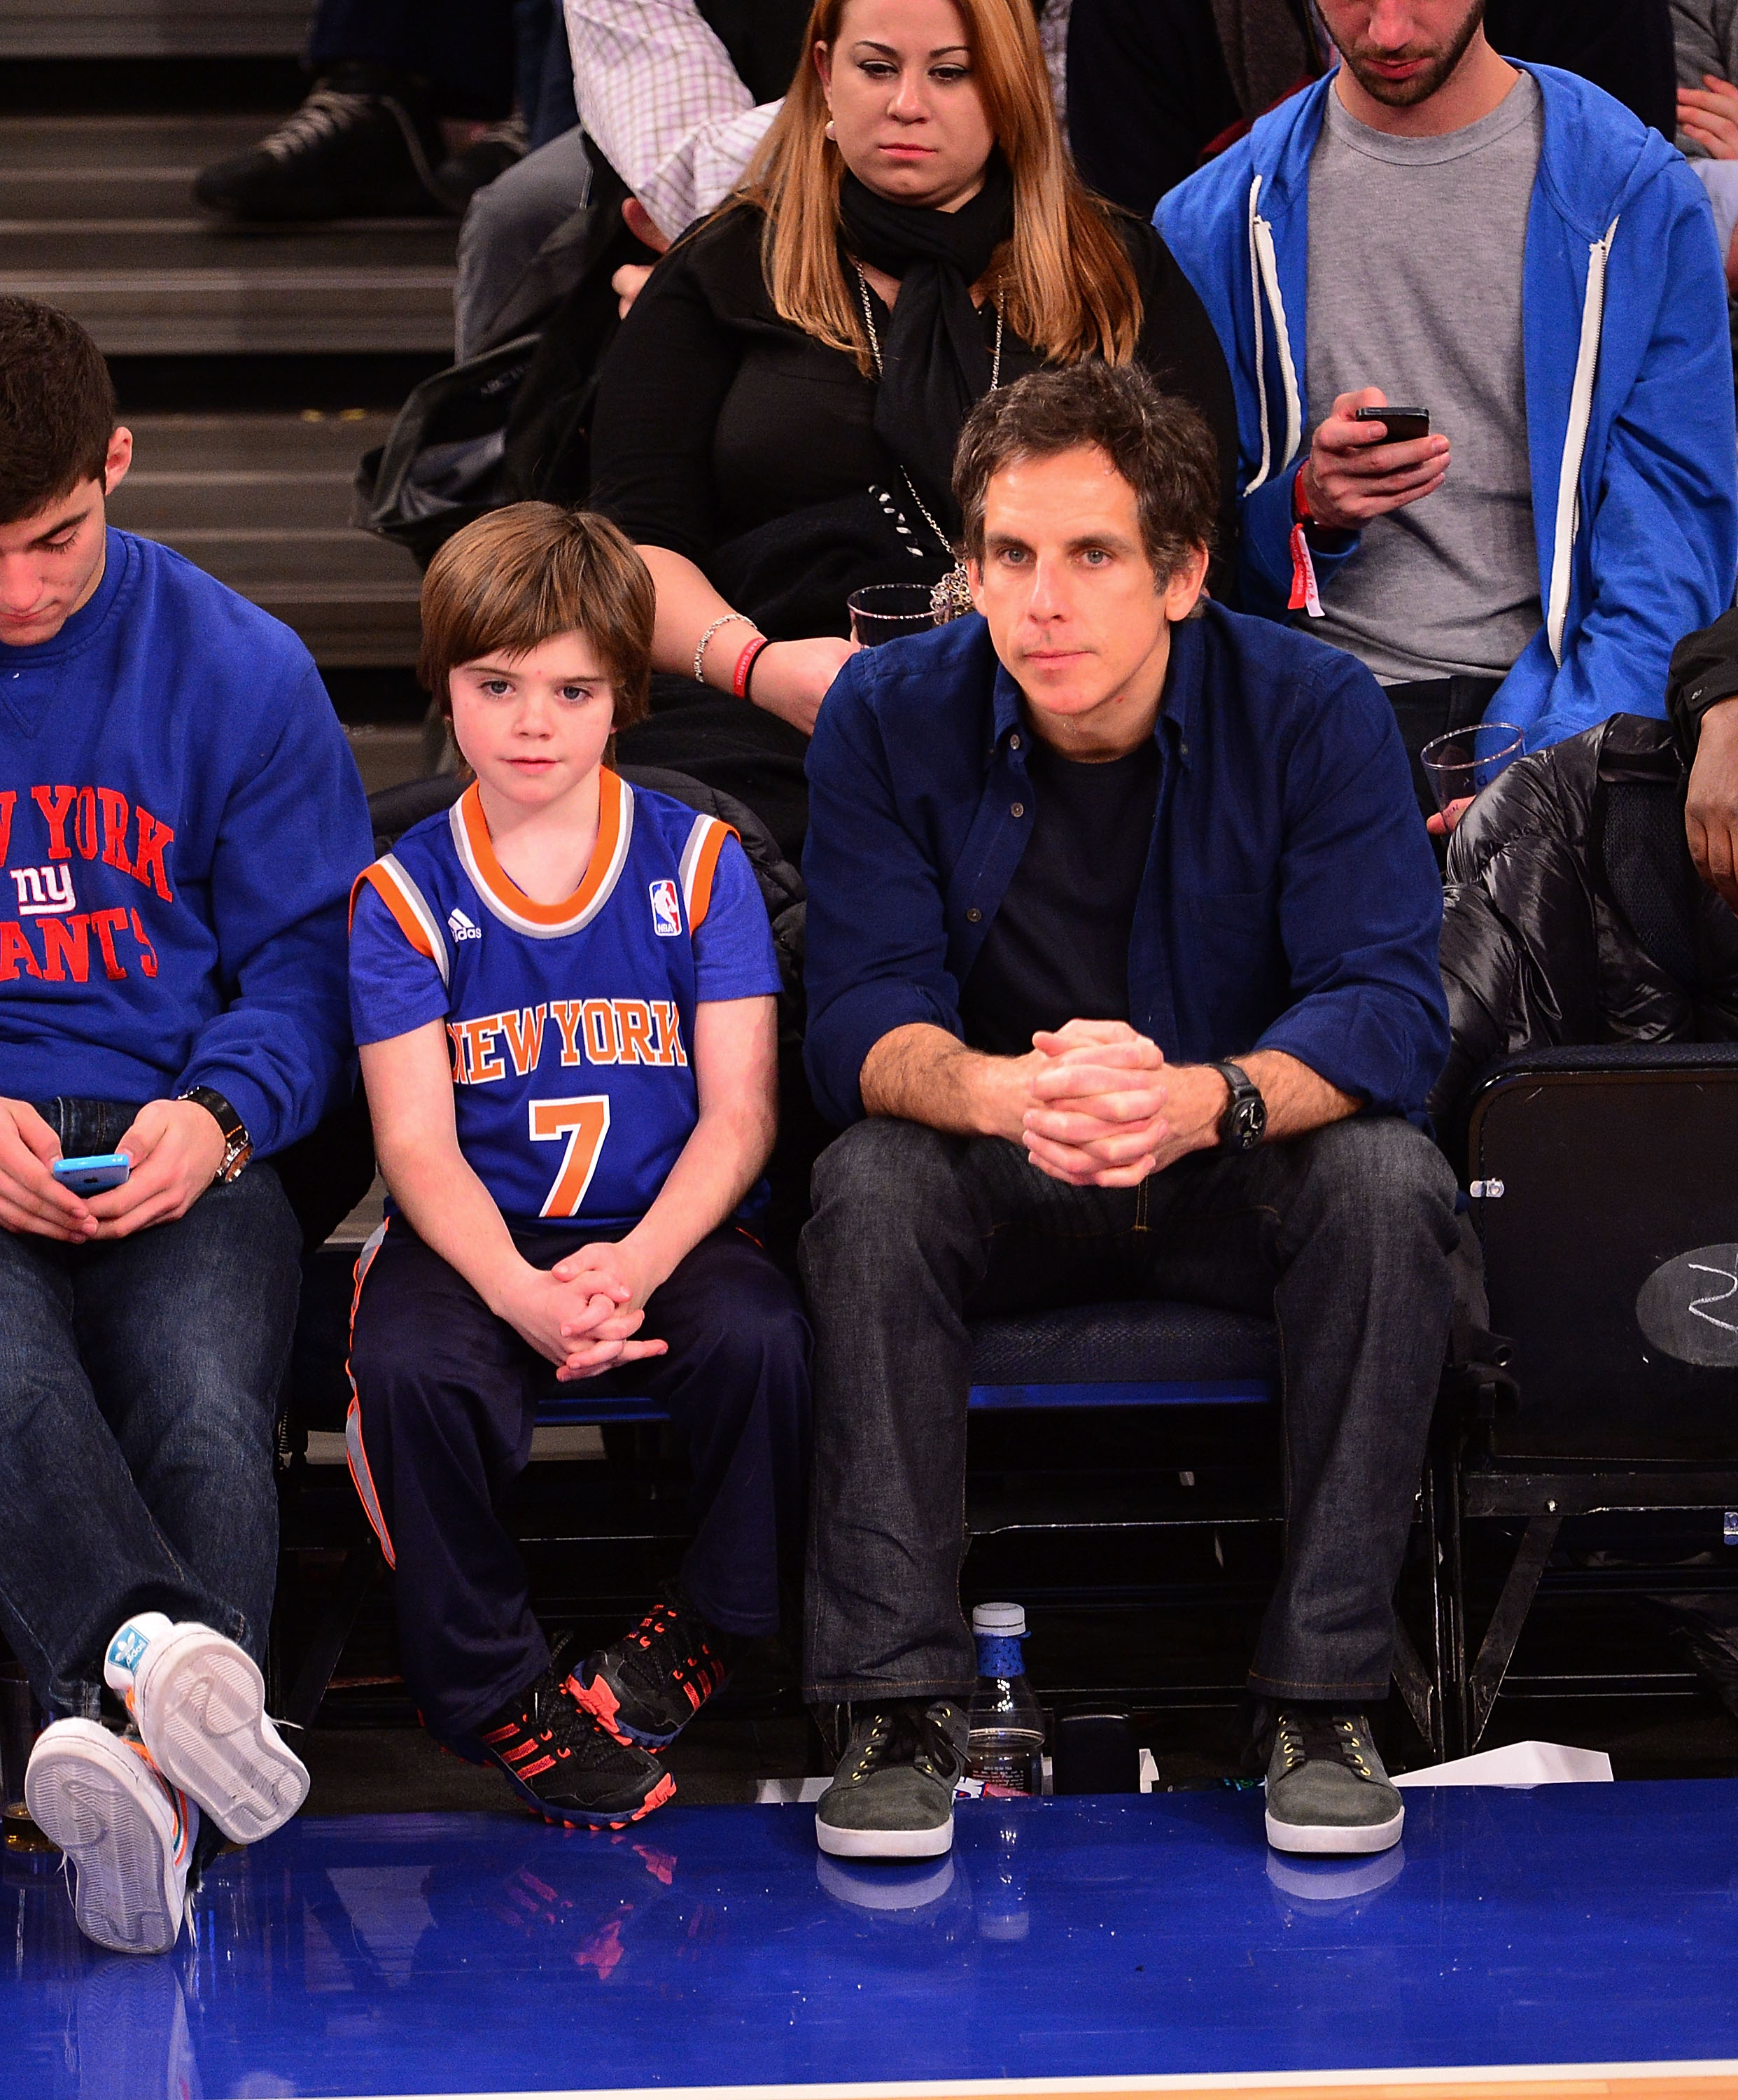 Quinlin and Ben Stiller at a New Orleans Pelicans Vs New York Knicks game in New York City on December 1, 2013. | Source: Getty Images